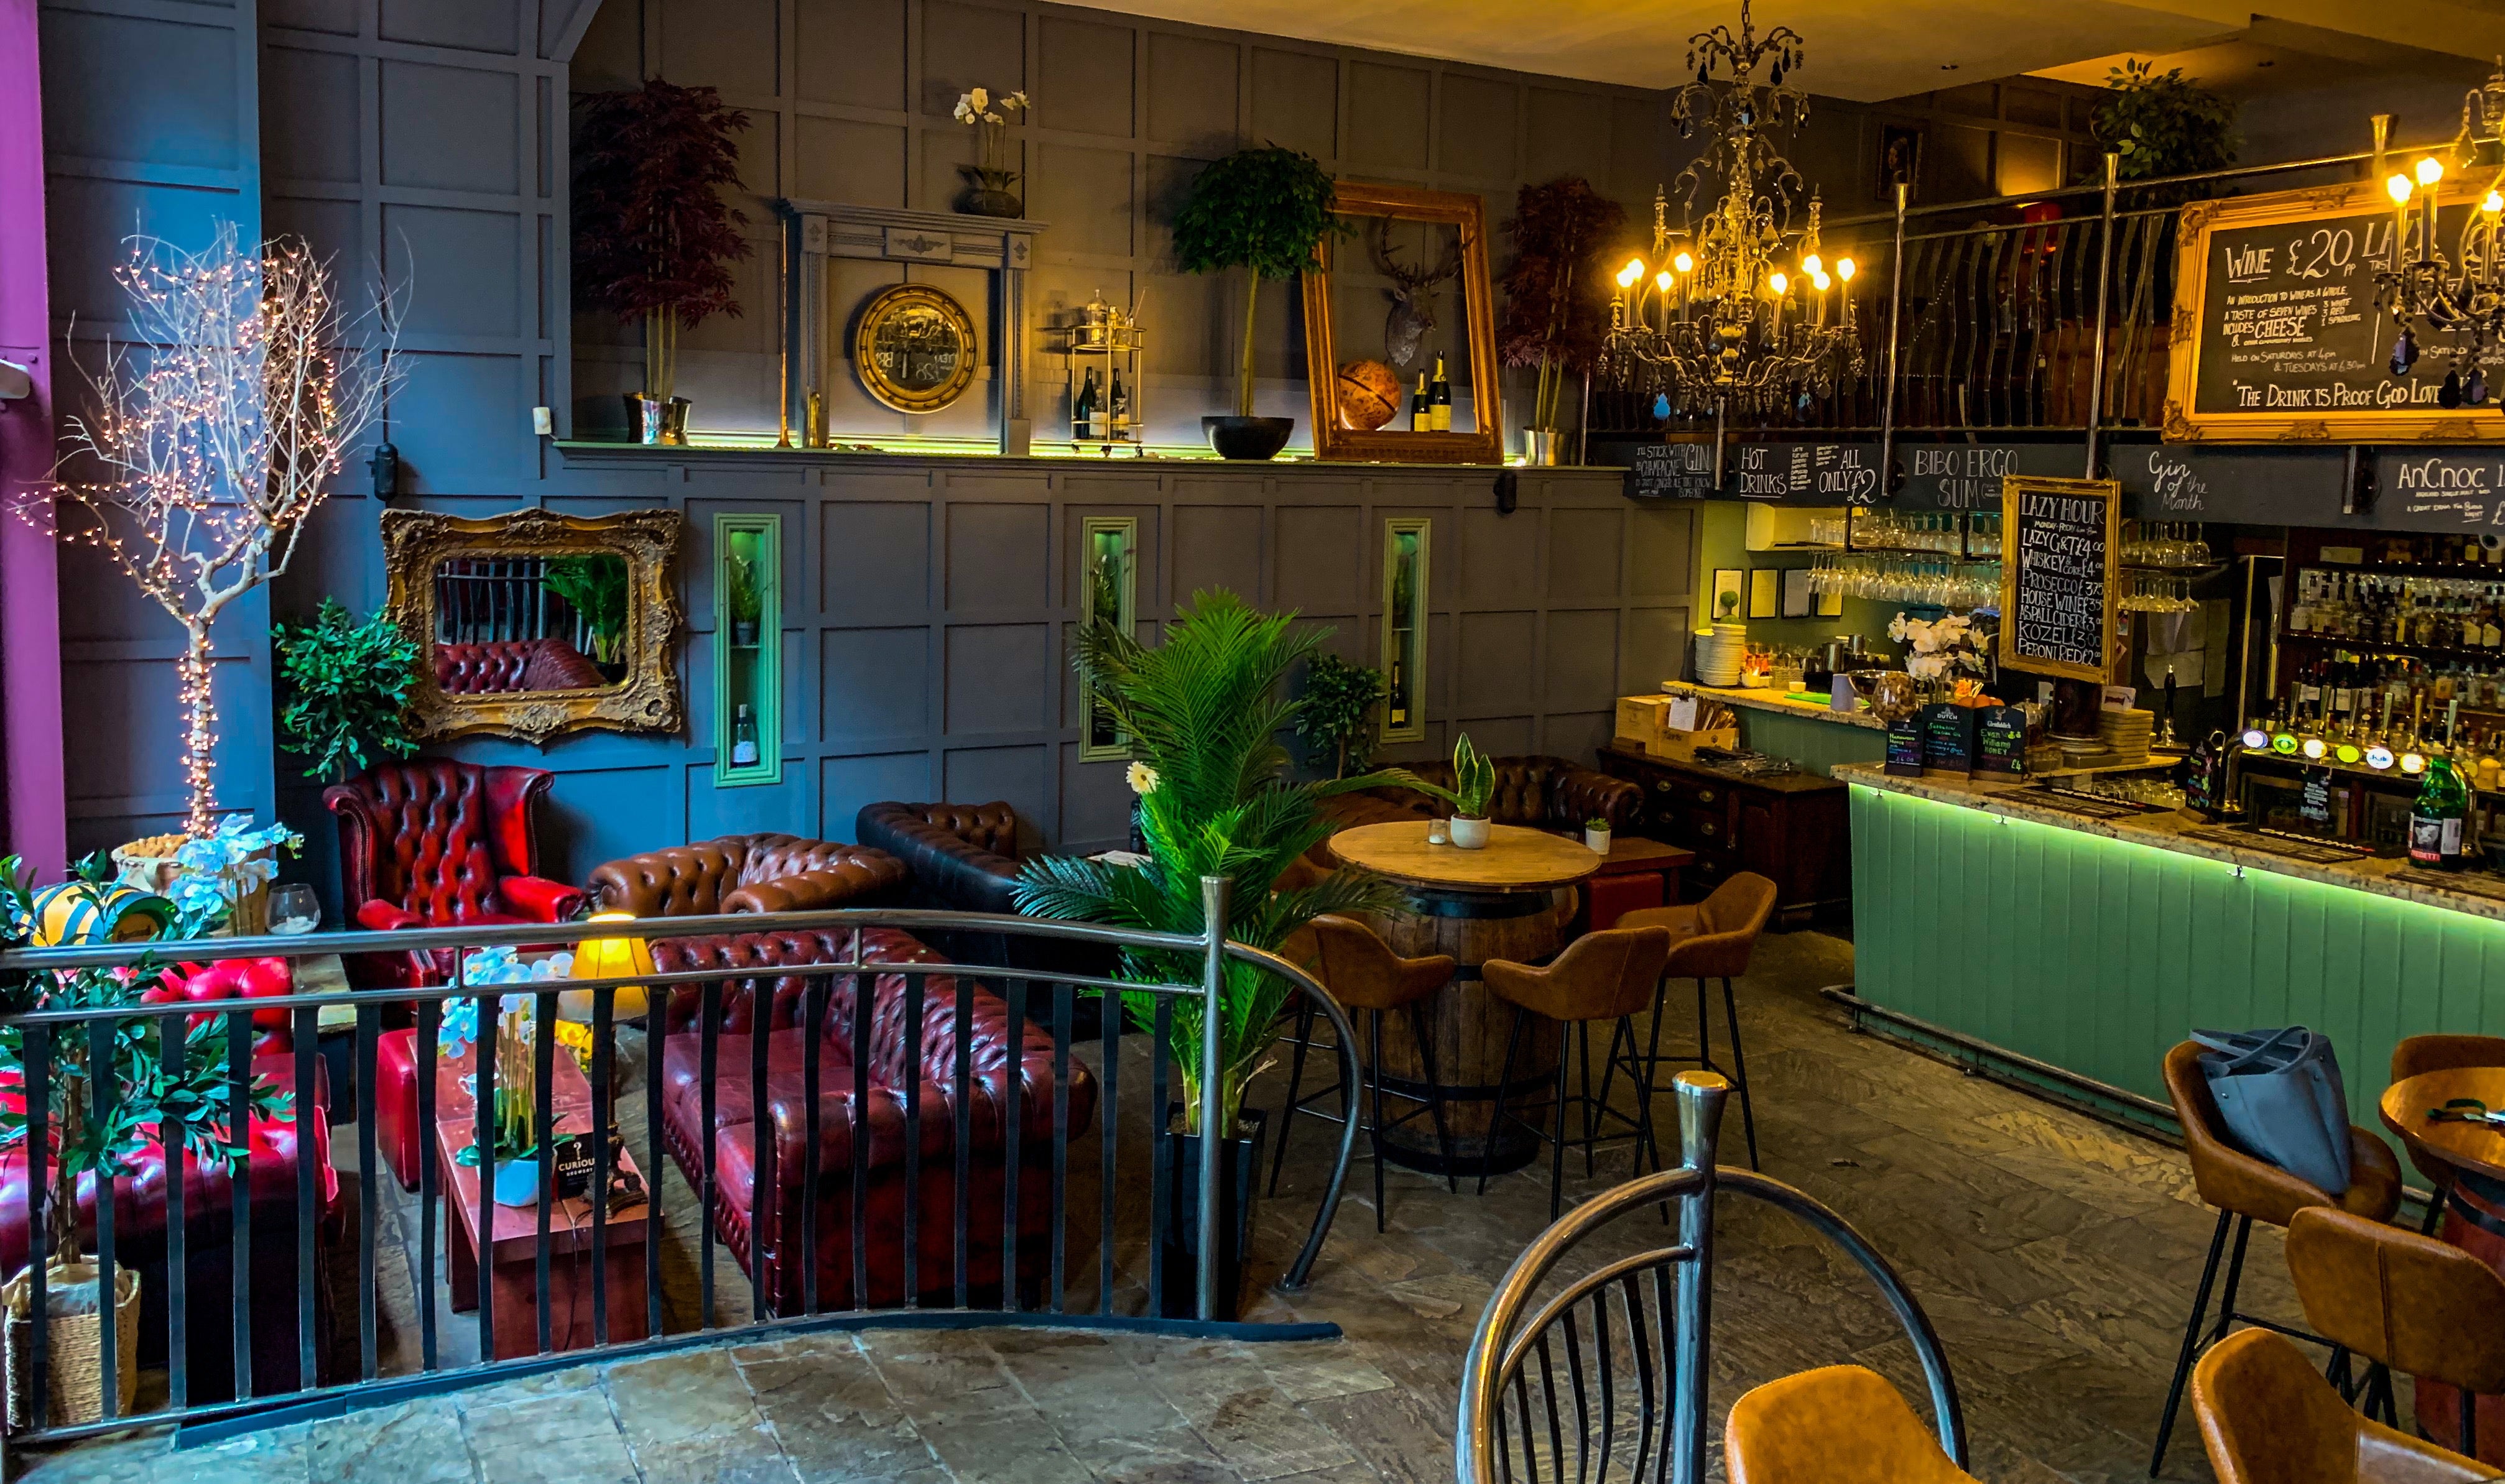 Enjoy quirky decor and upscale drinks in Leeds’ Lazy Lounge